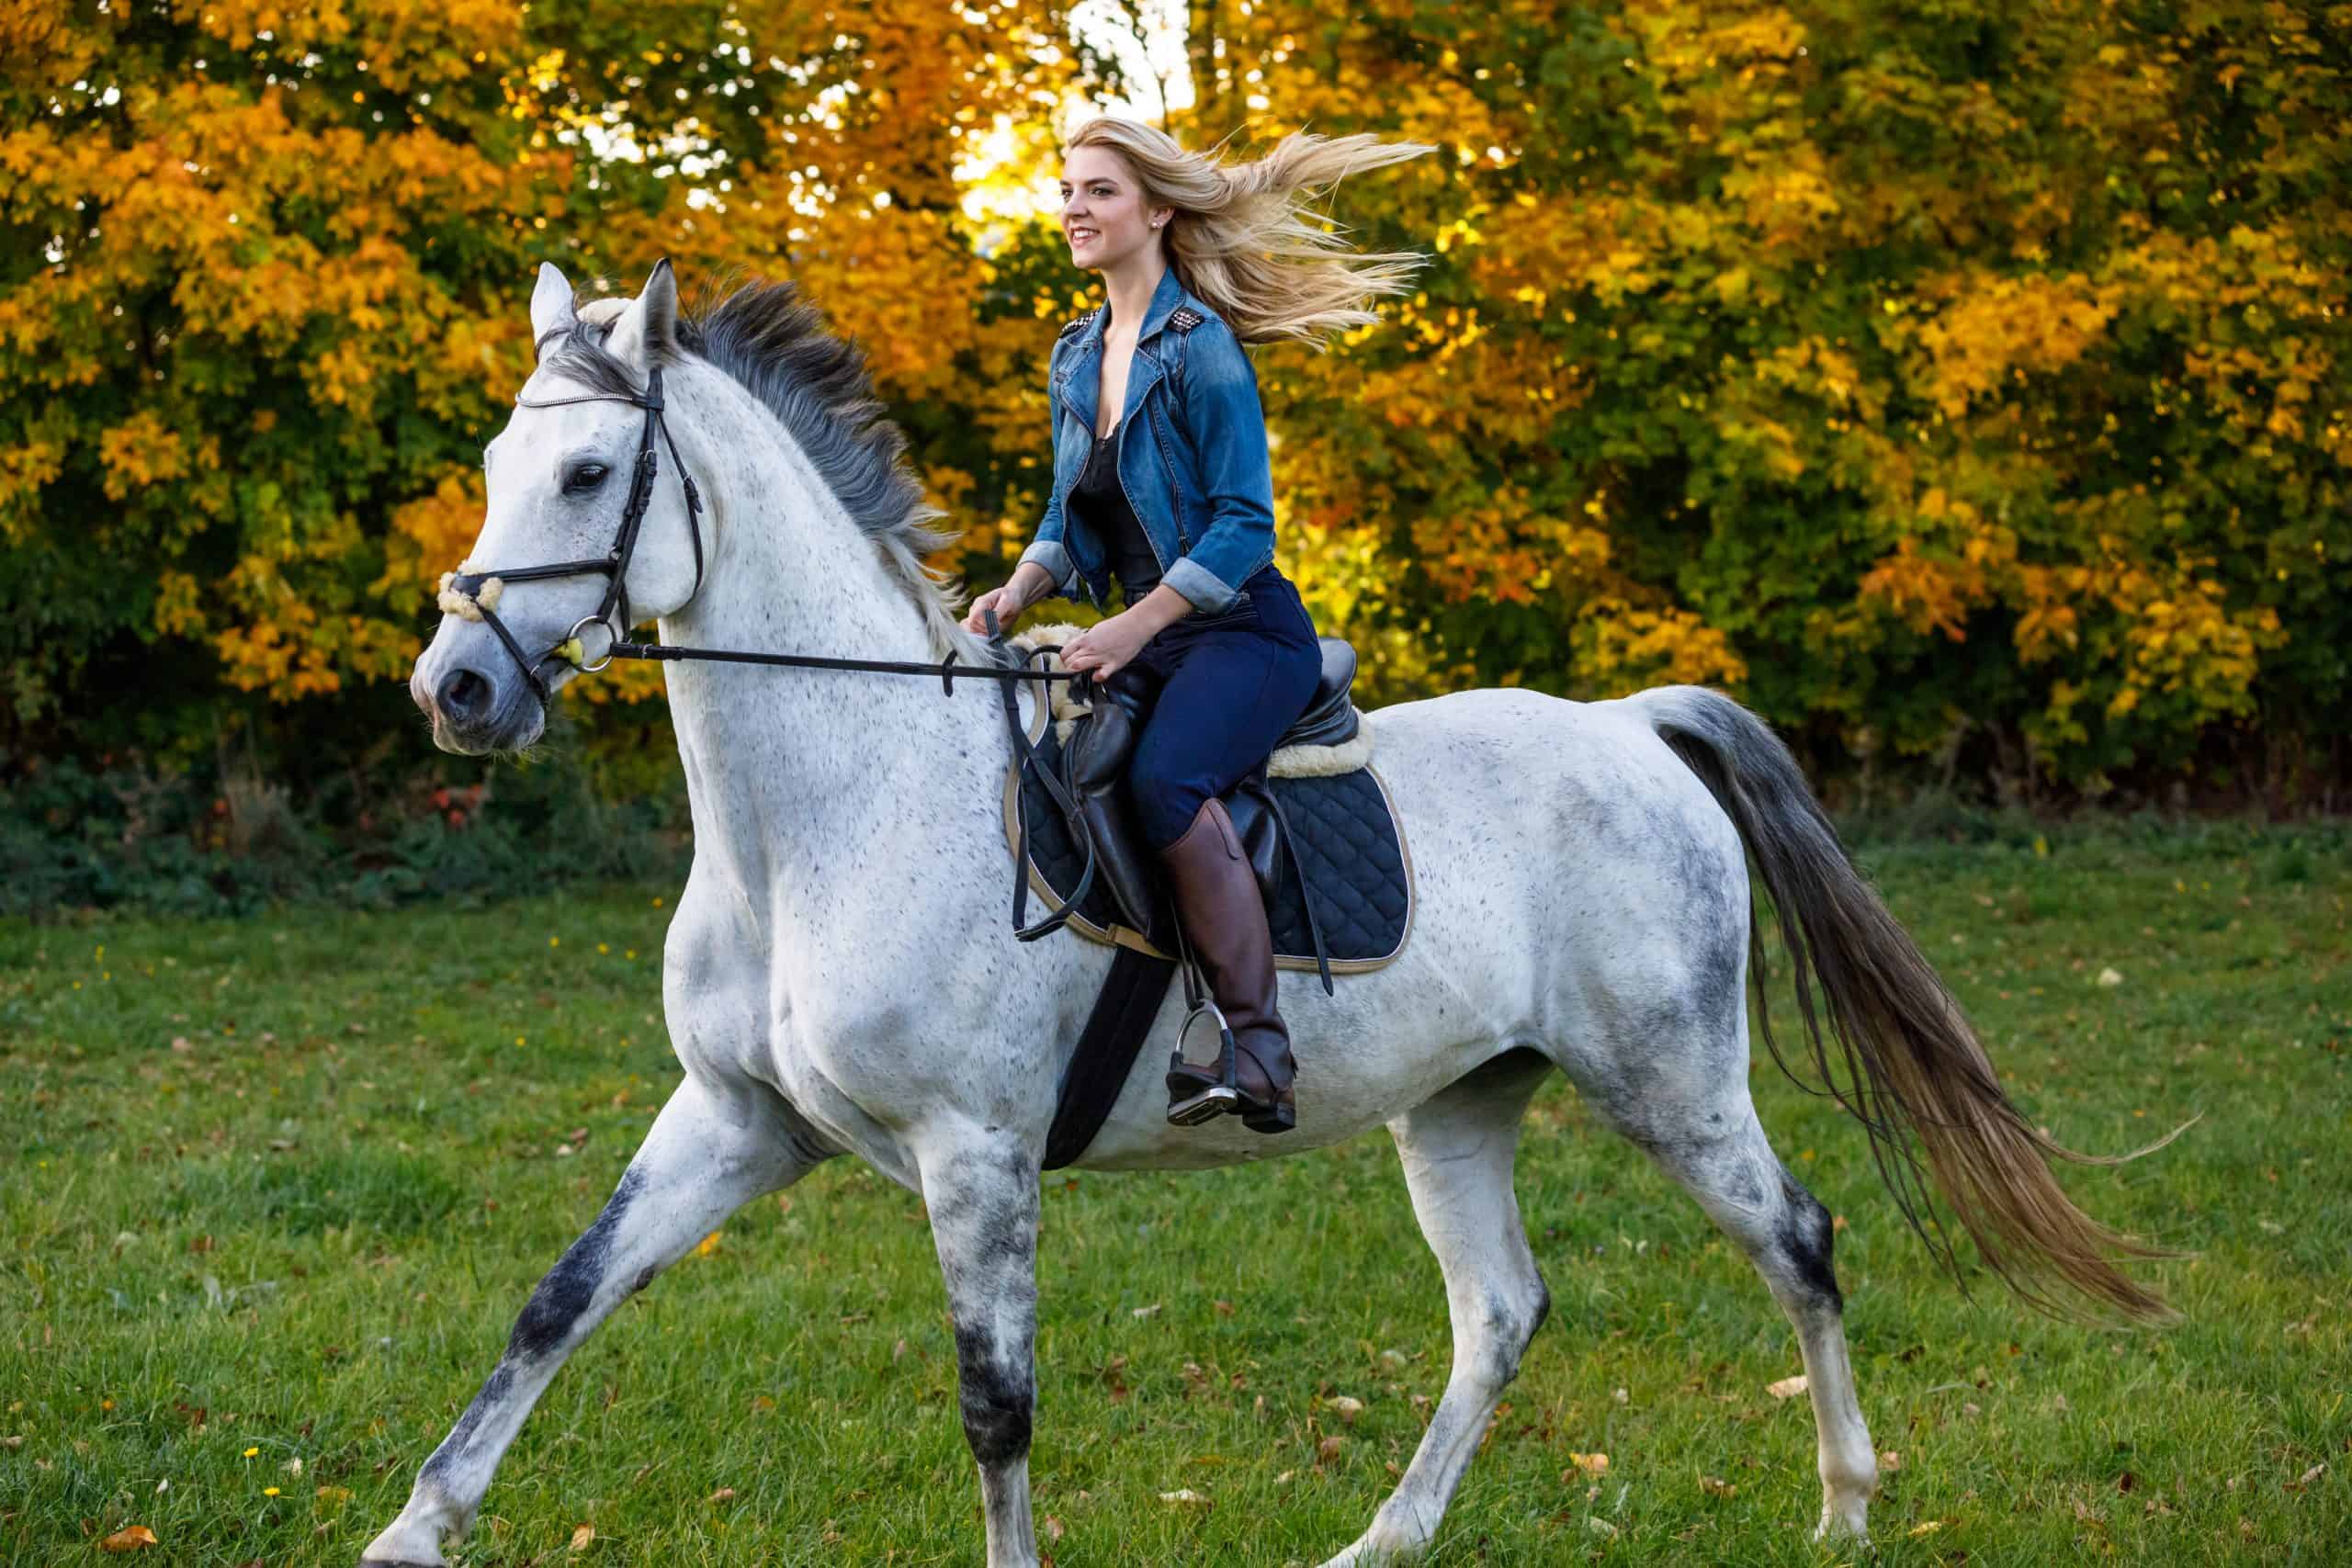 Woman riding a horse in park